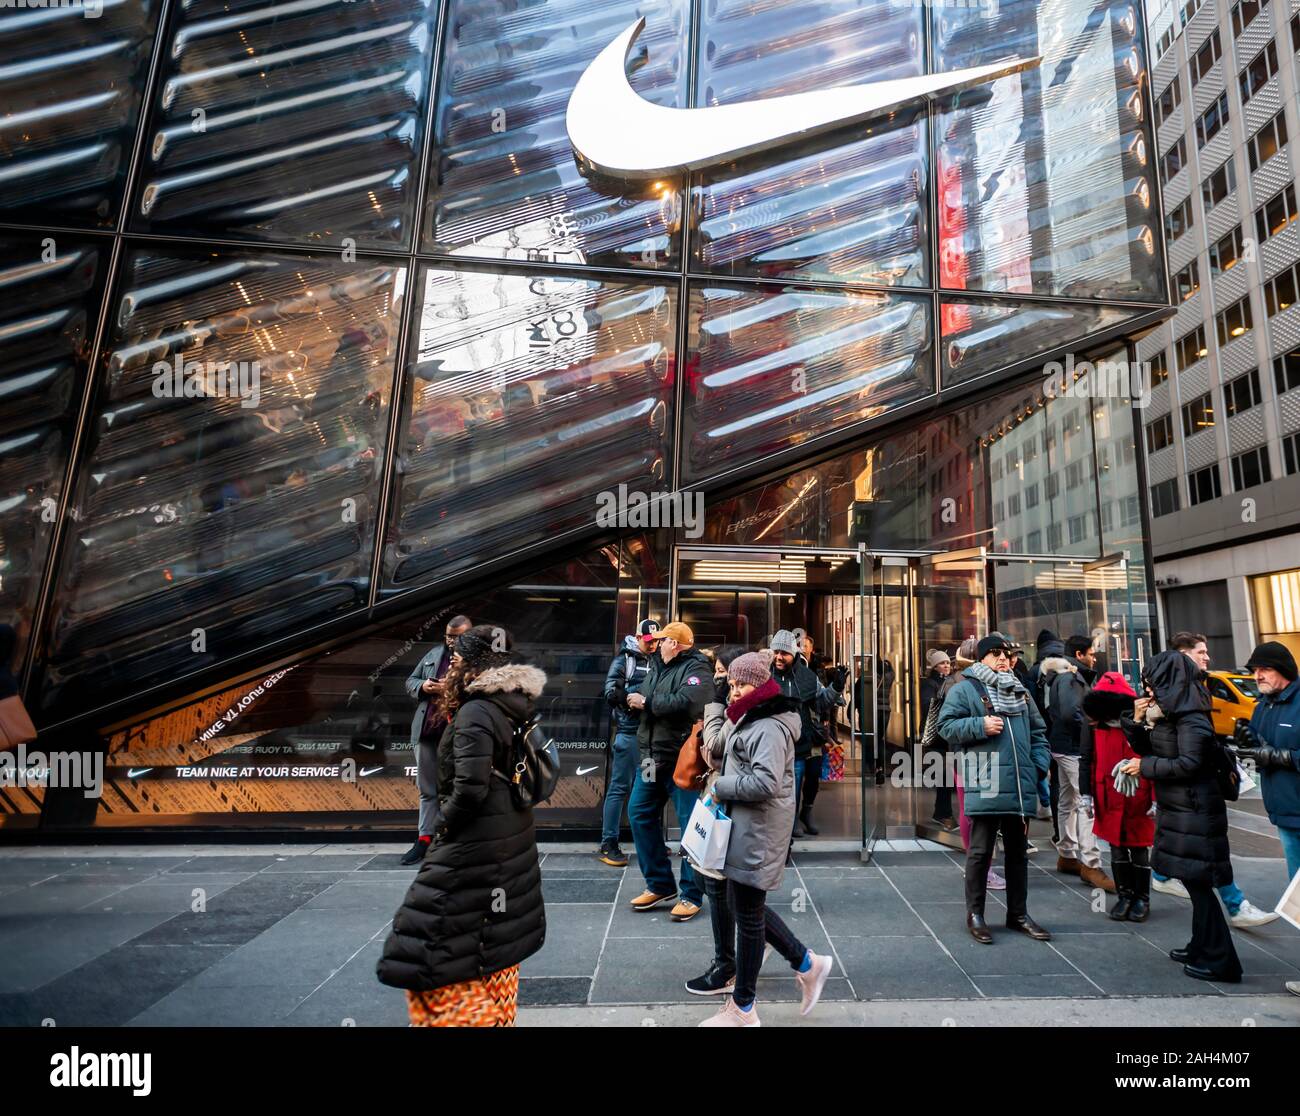 Page 3 - Nike By Nyc High Resolution 